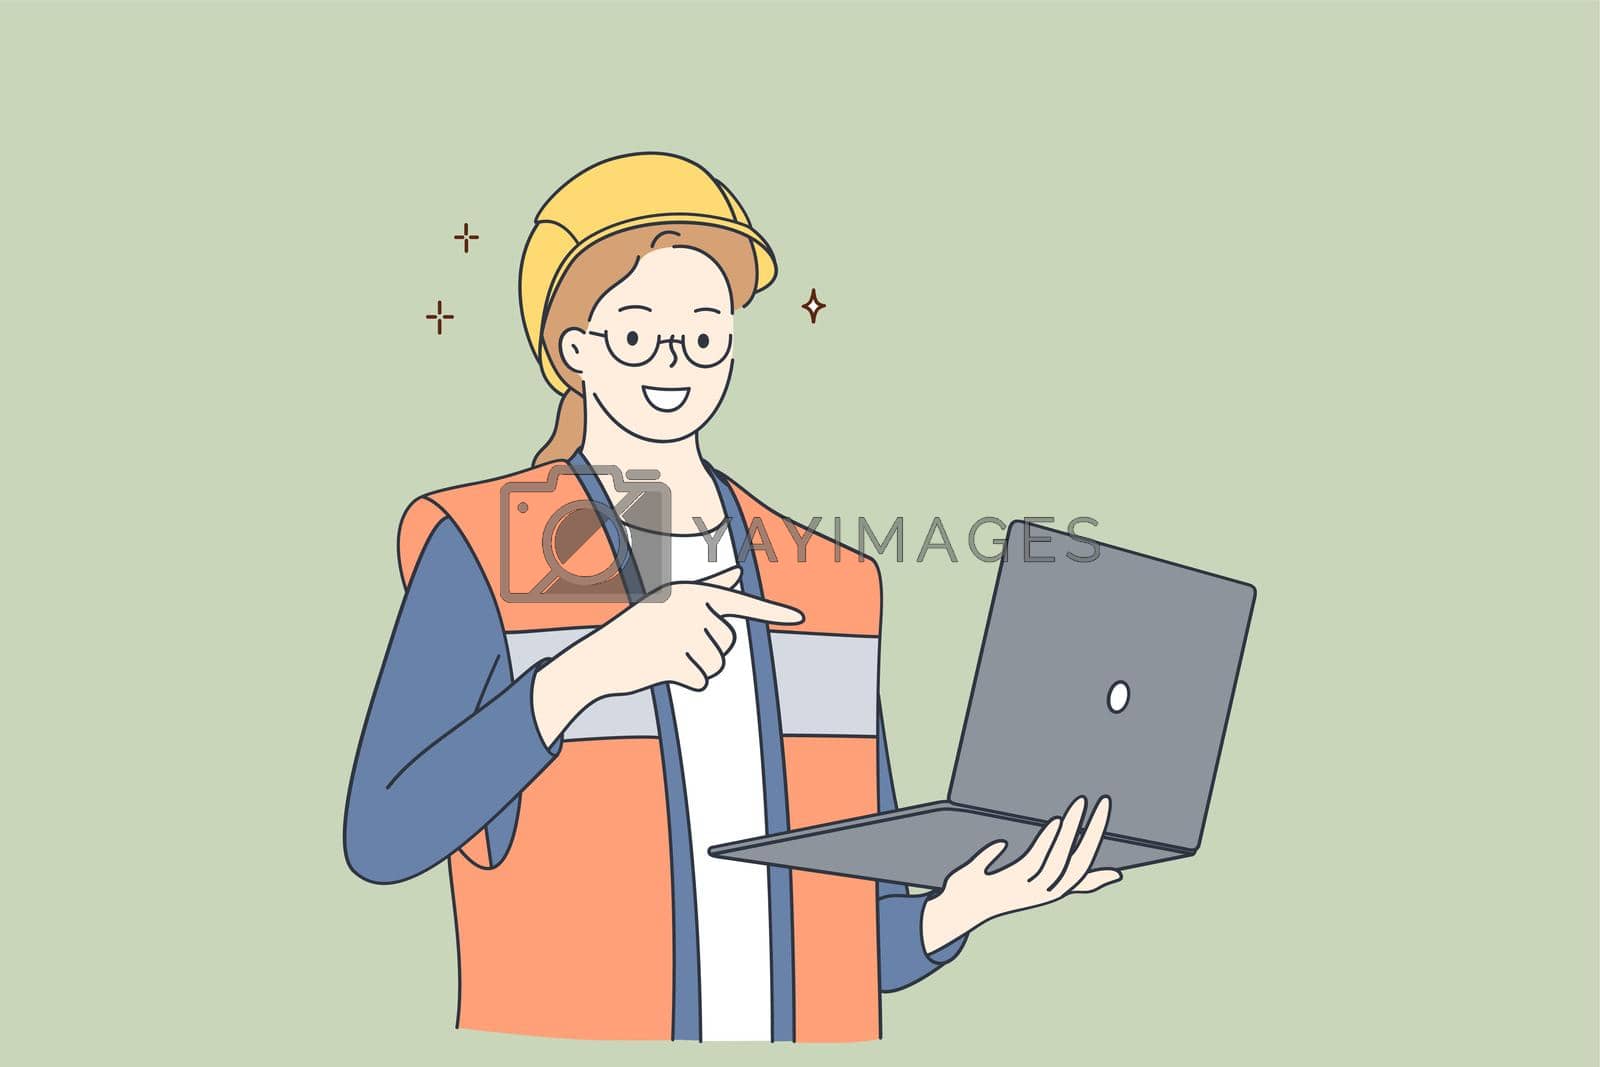 Architects using wireless technology concept. Young smiling beautiful woman cartoon character wearing protective helmet and uniform holding laptop and pointing with hand and finger